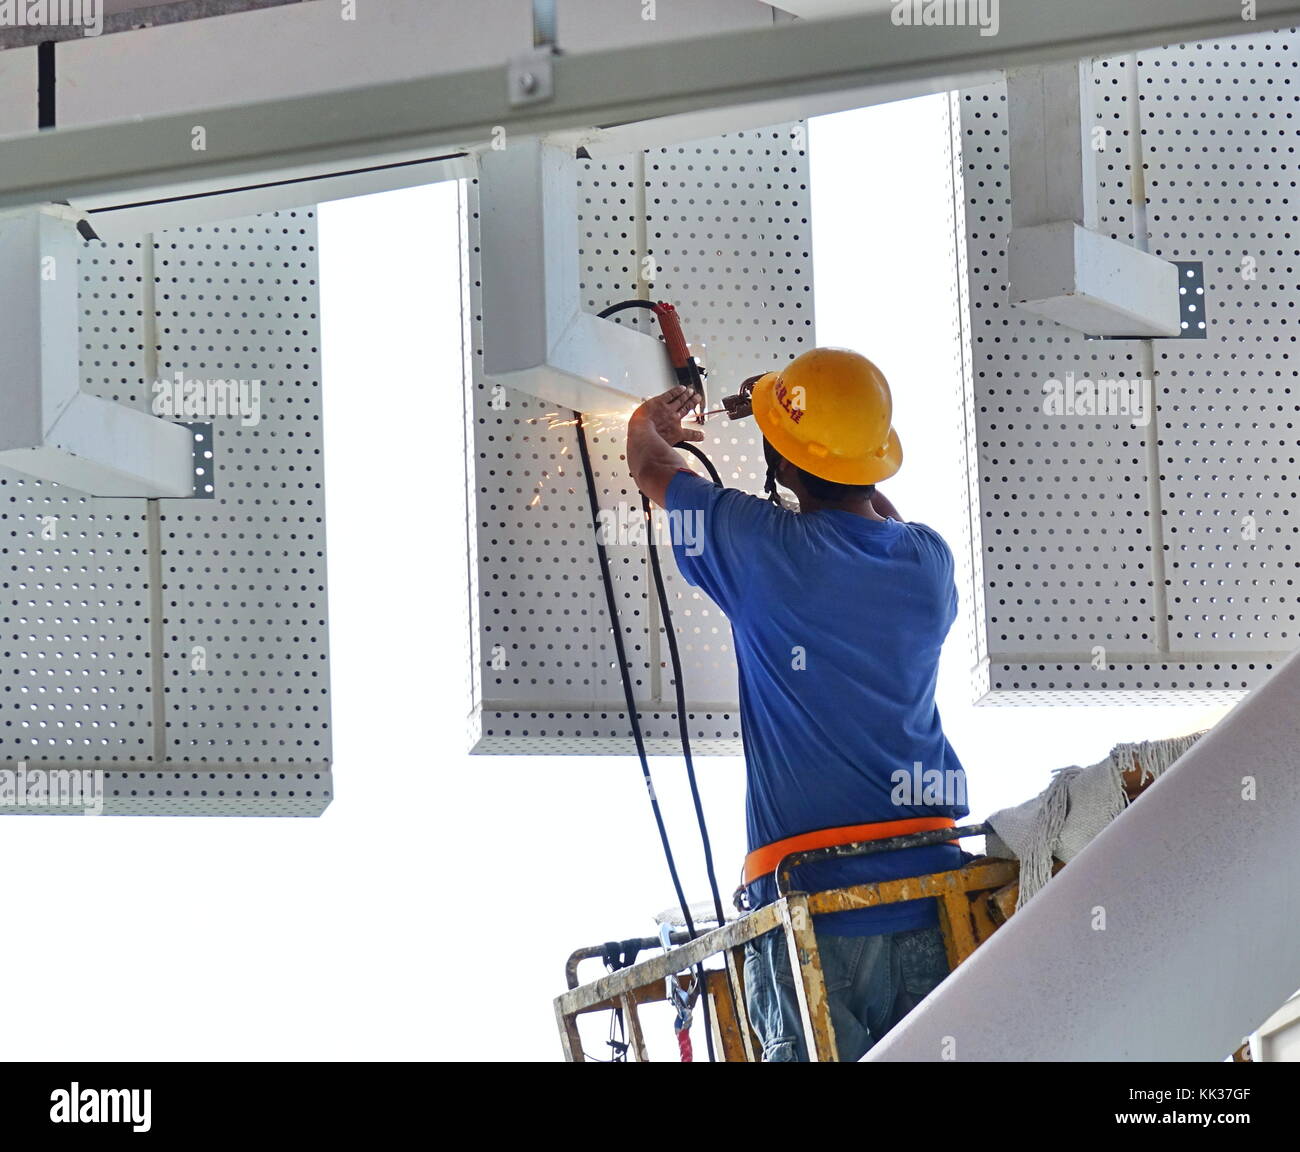 KAOHSIUNG, TAIWAN -- AUGUST 7, 2017: A worker with a helmet performs welding operations without adequate safety equipment. Stock Photo